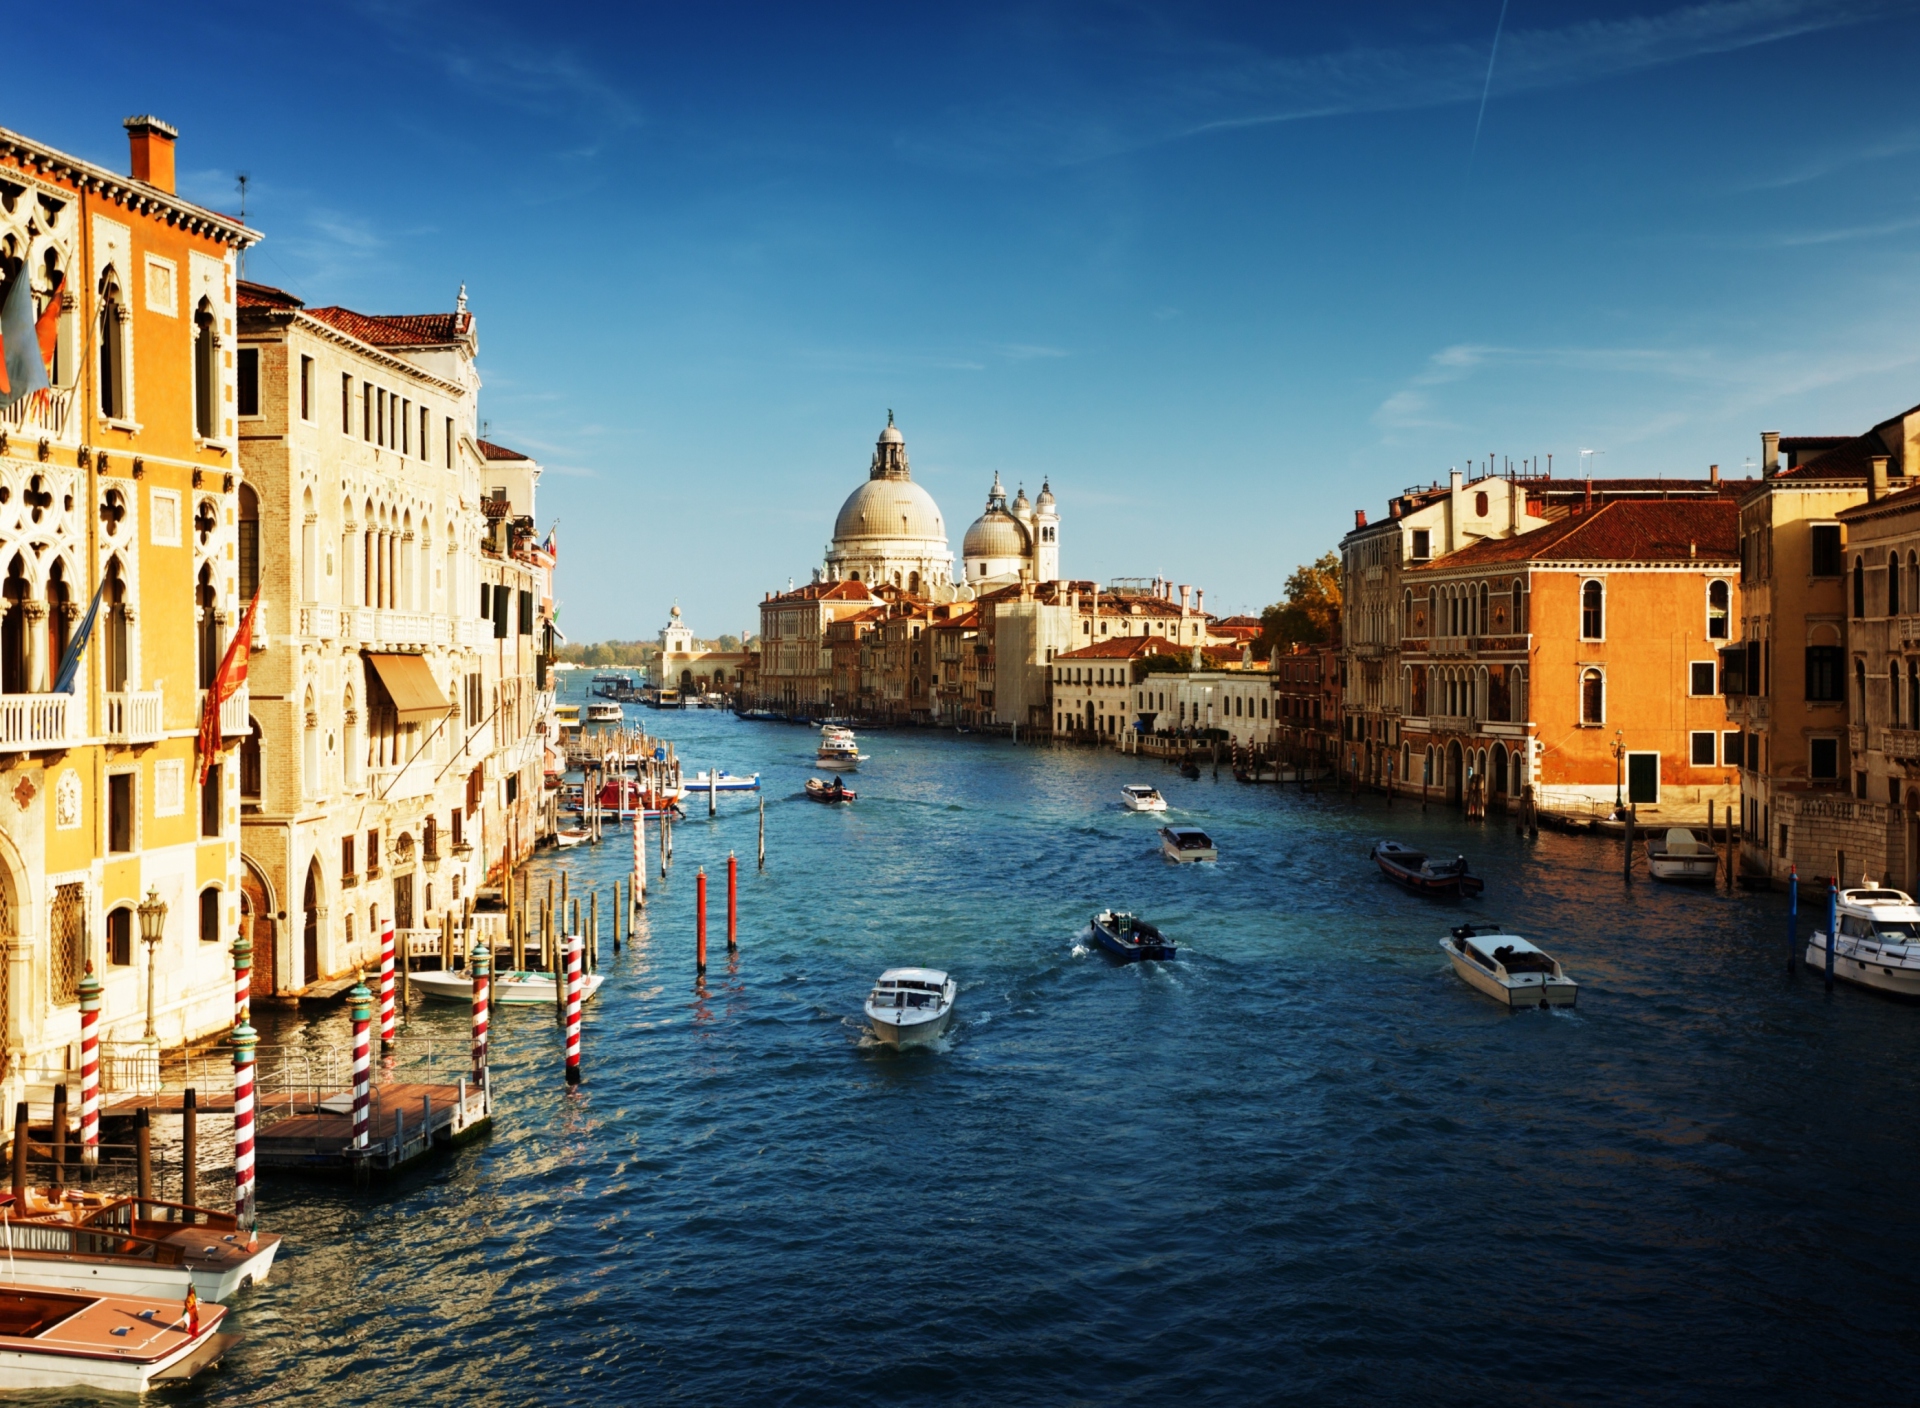 Venice, Italy, The Grand Canal screenshot #1 1920x1408